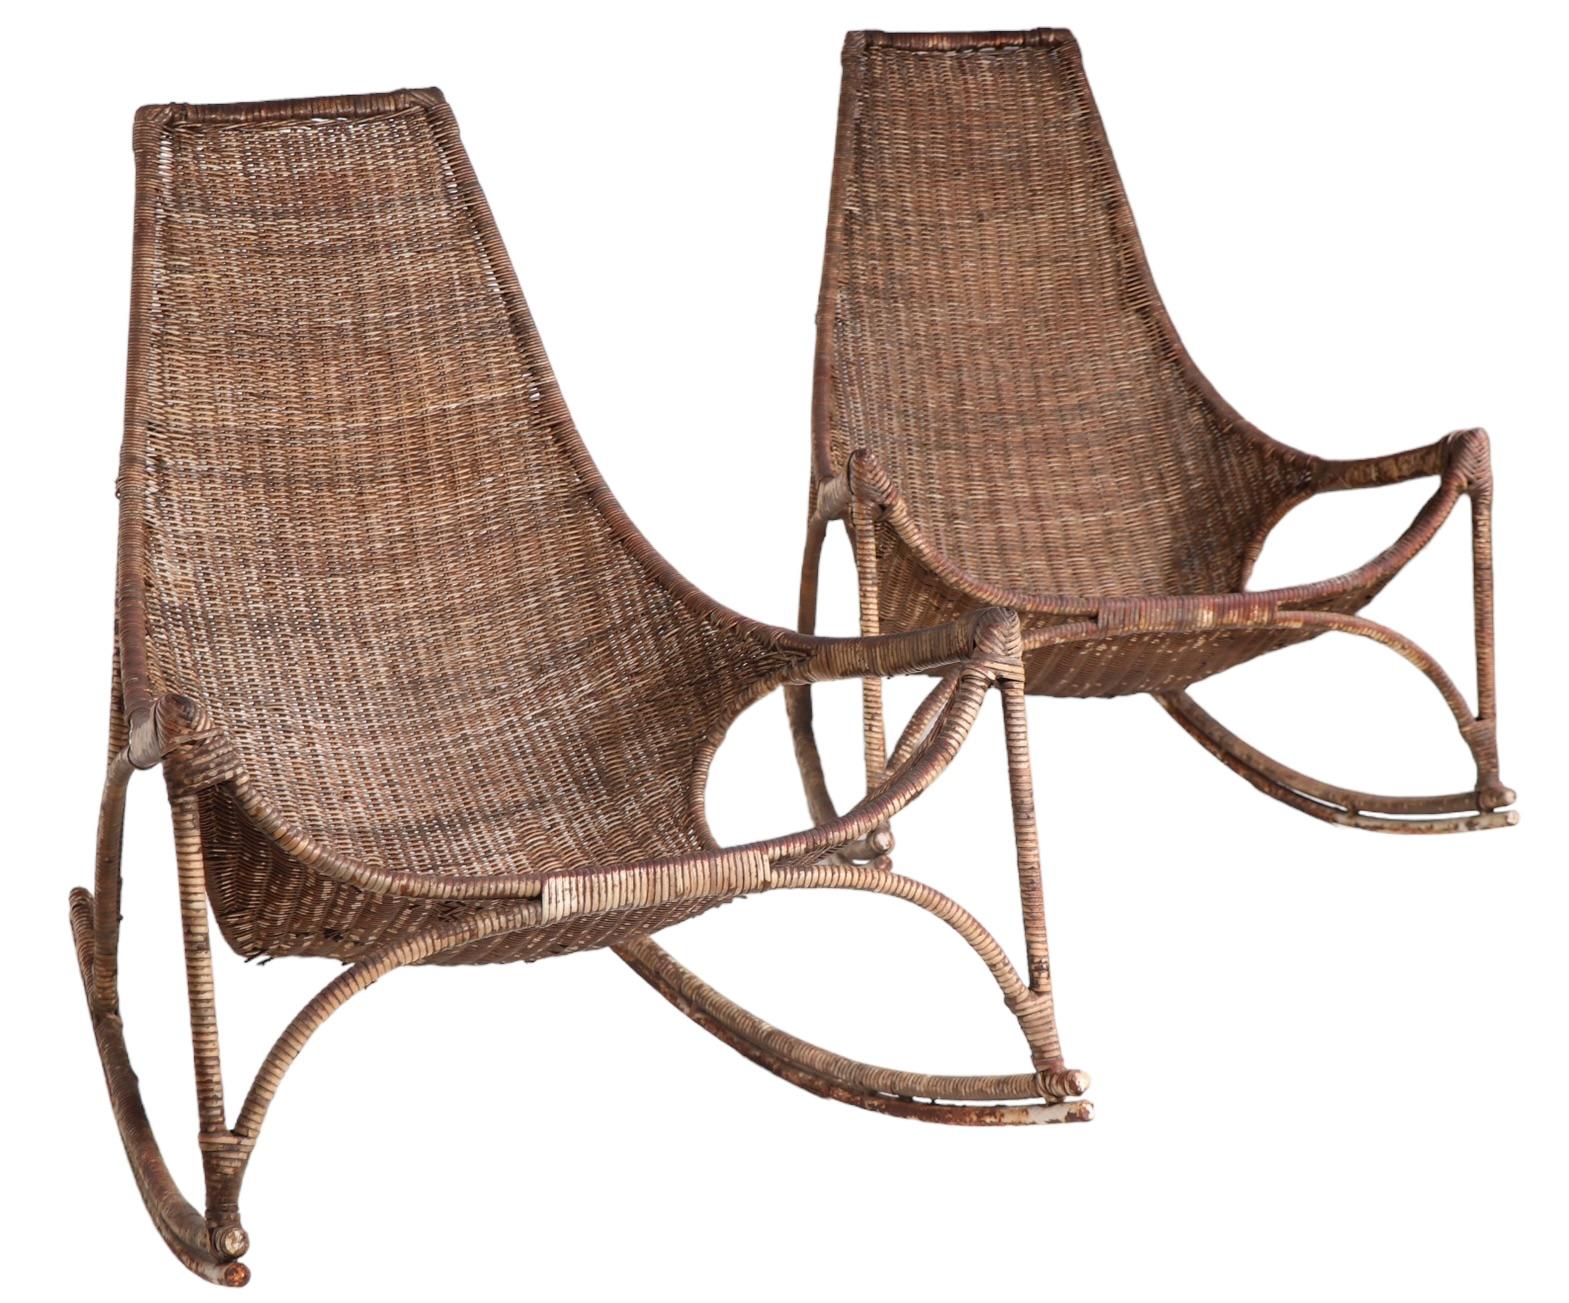 Pr. Wicker Rocking Chairs by Francis Mair c 1950/1960's For Sale 5